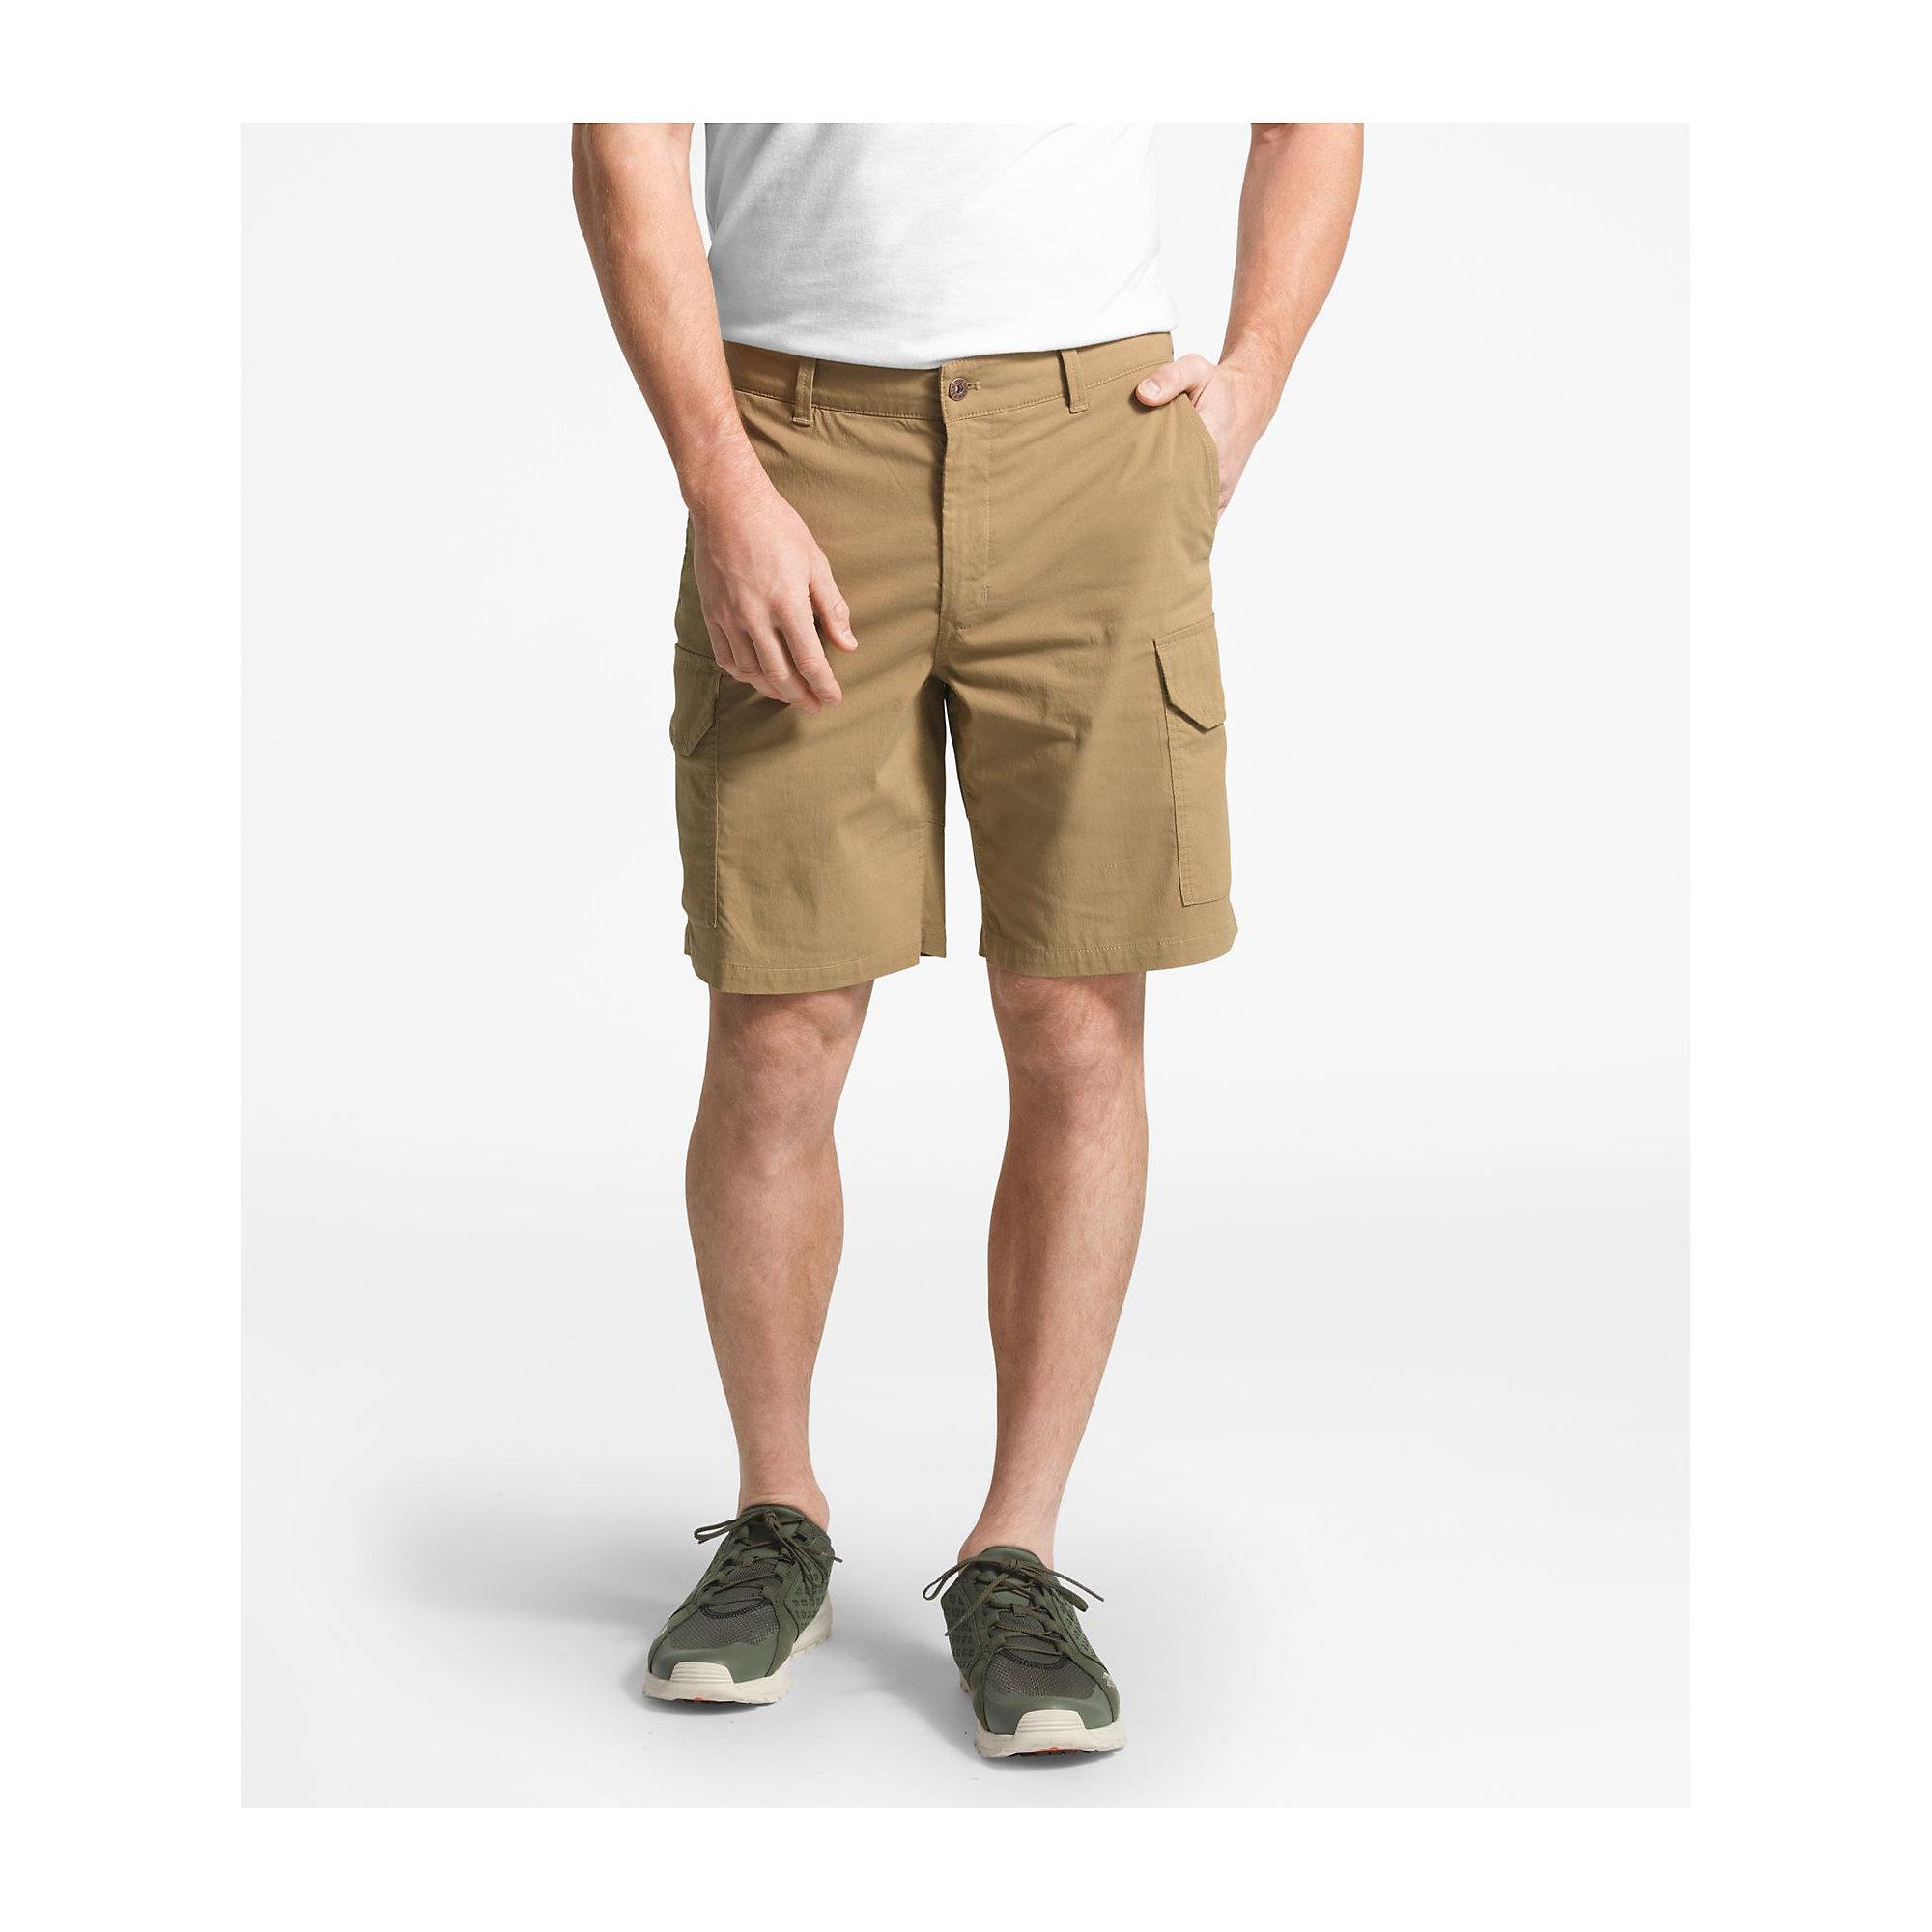 North Face Cotton Junction 9 Inch Short 